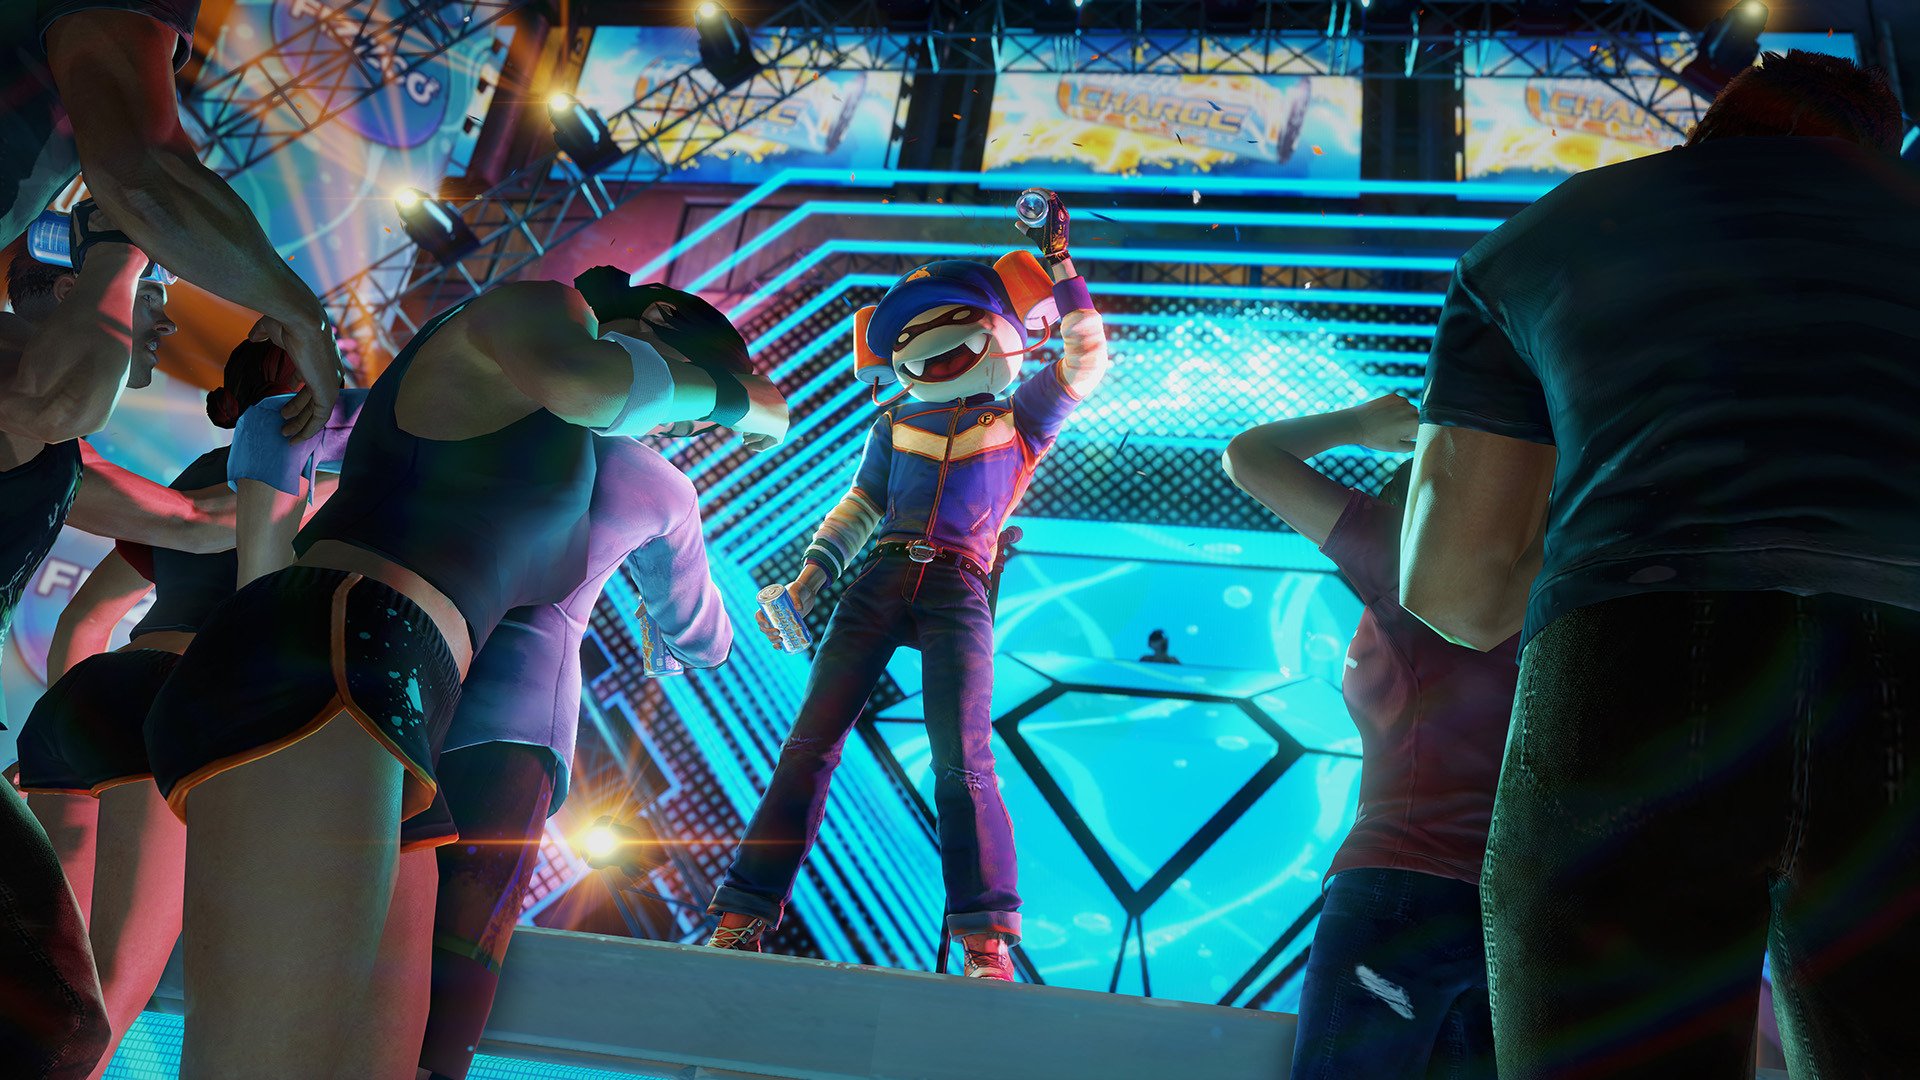 50+ Sunset Overdrive HD Wallpapers and Backgrounds